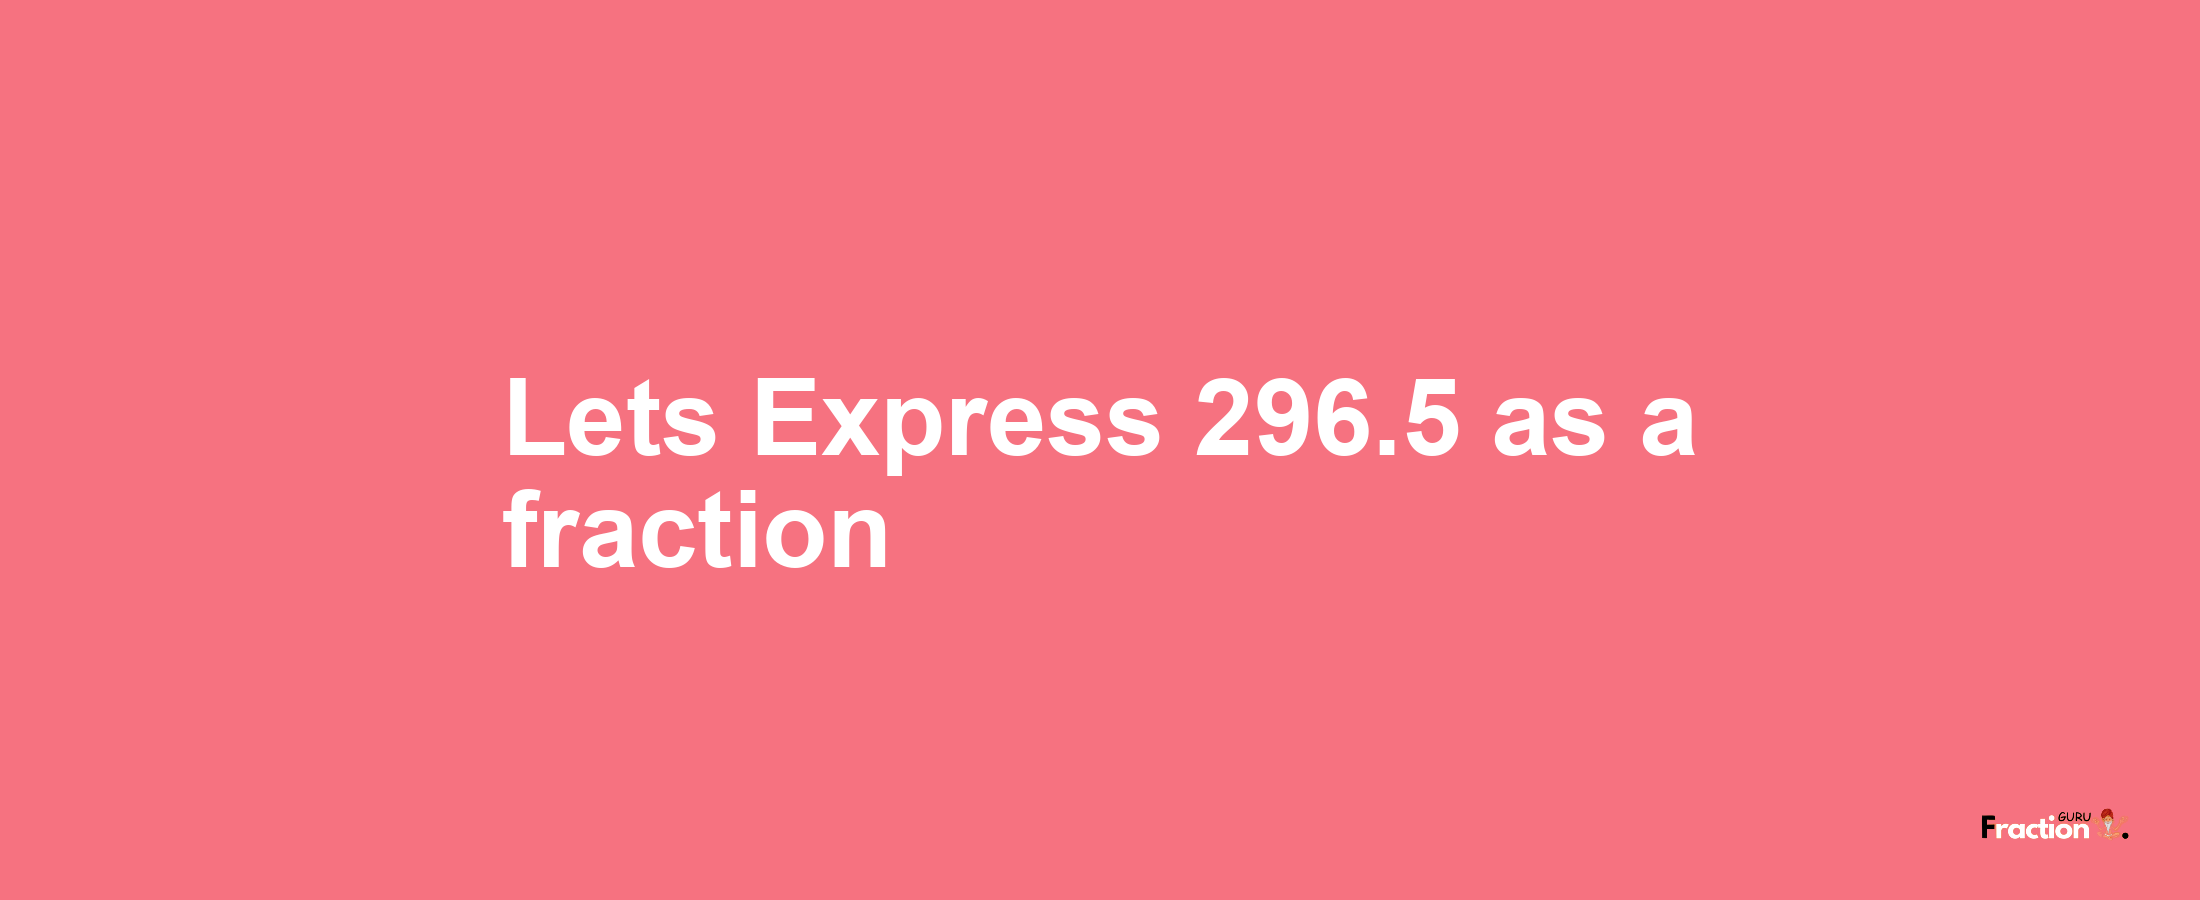 Lets Express 296.5 as afraction